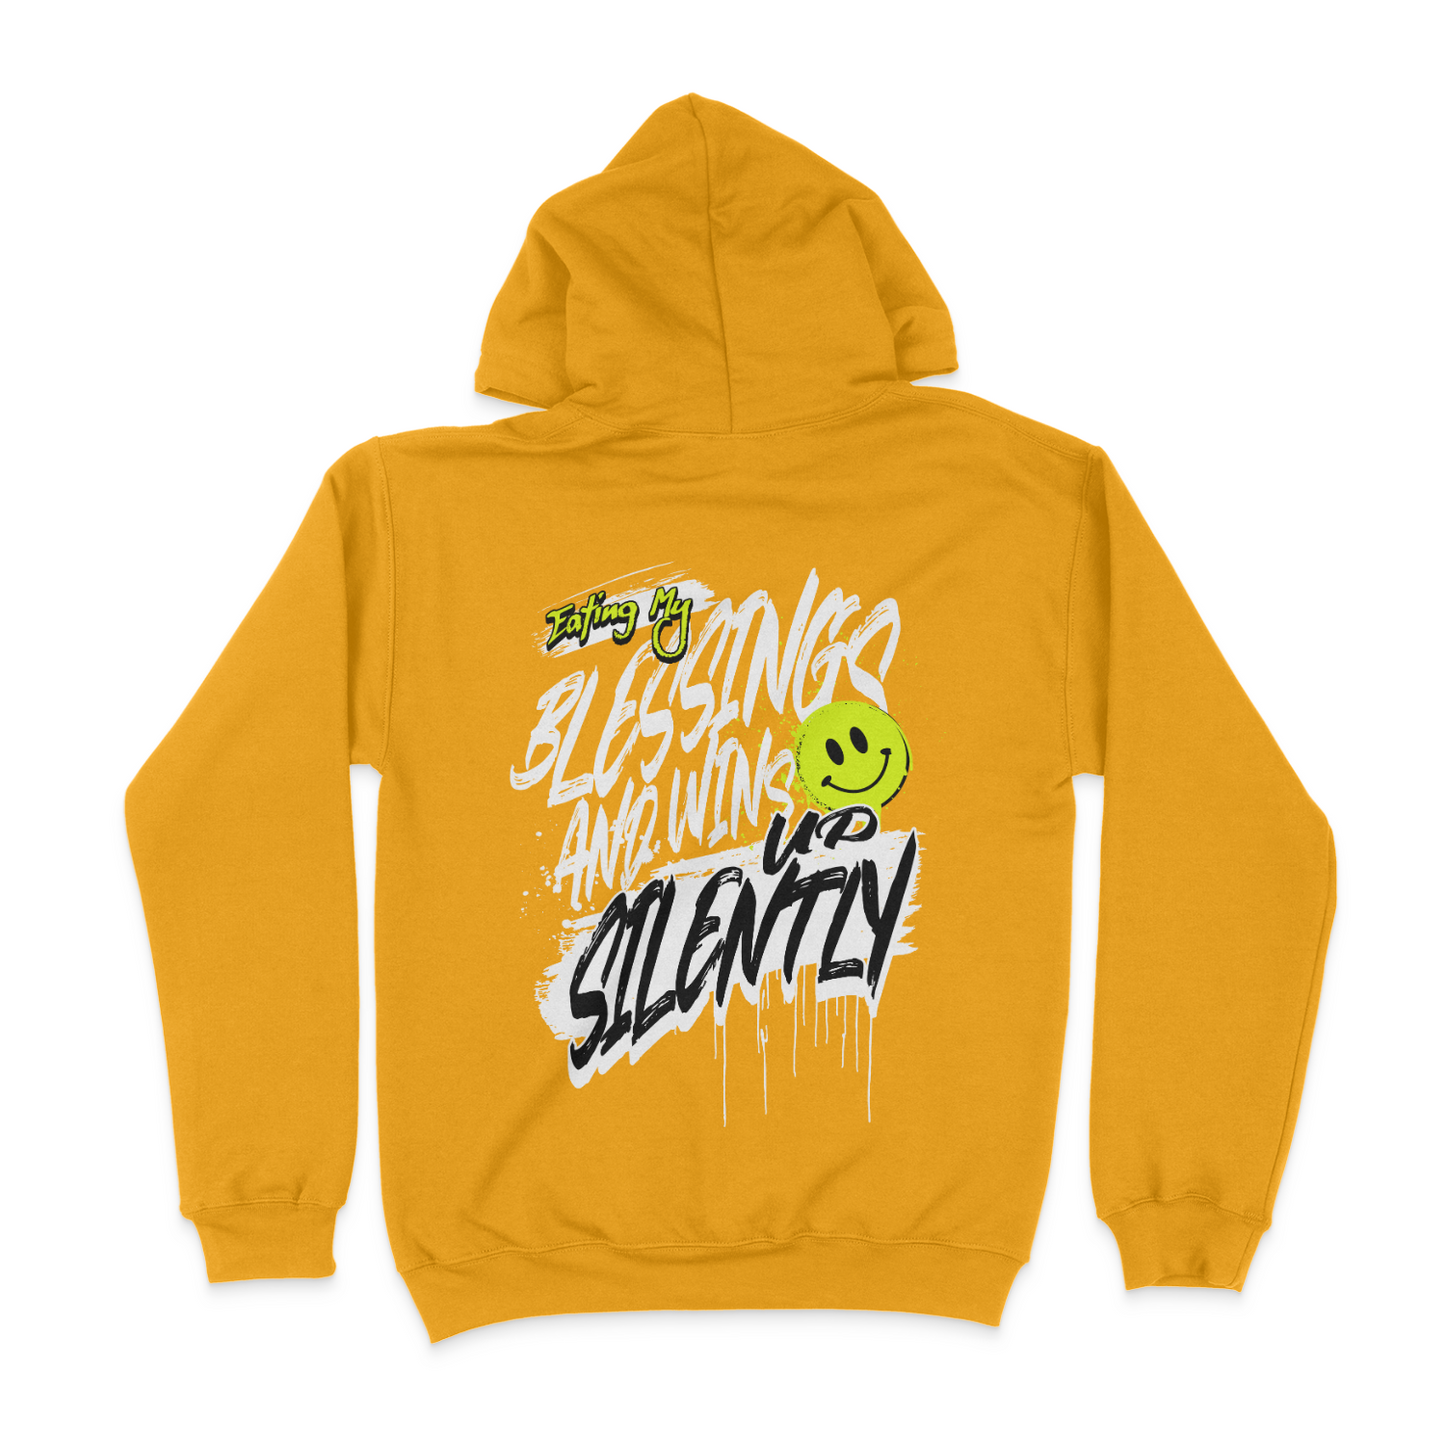 Eating My Blessings And Wins Up Silently Graphic Unisex Hoodie